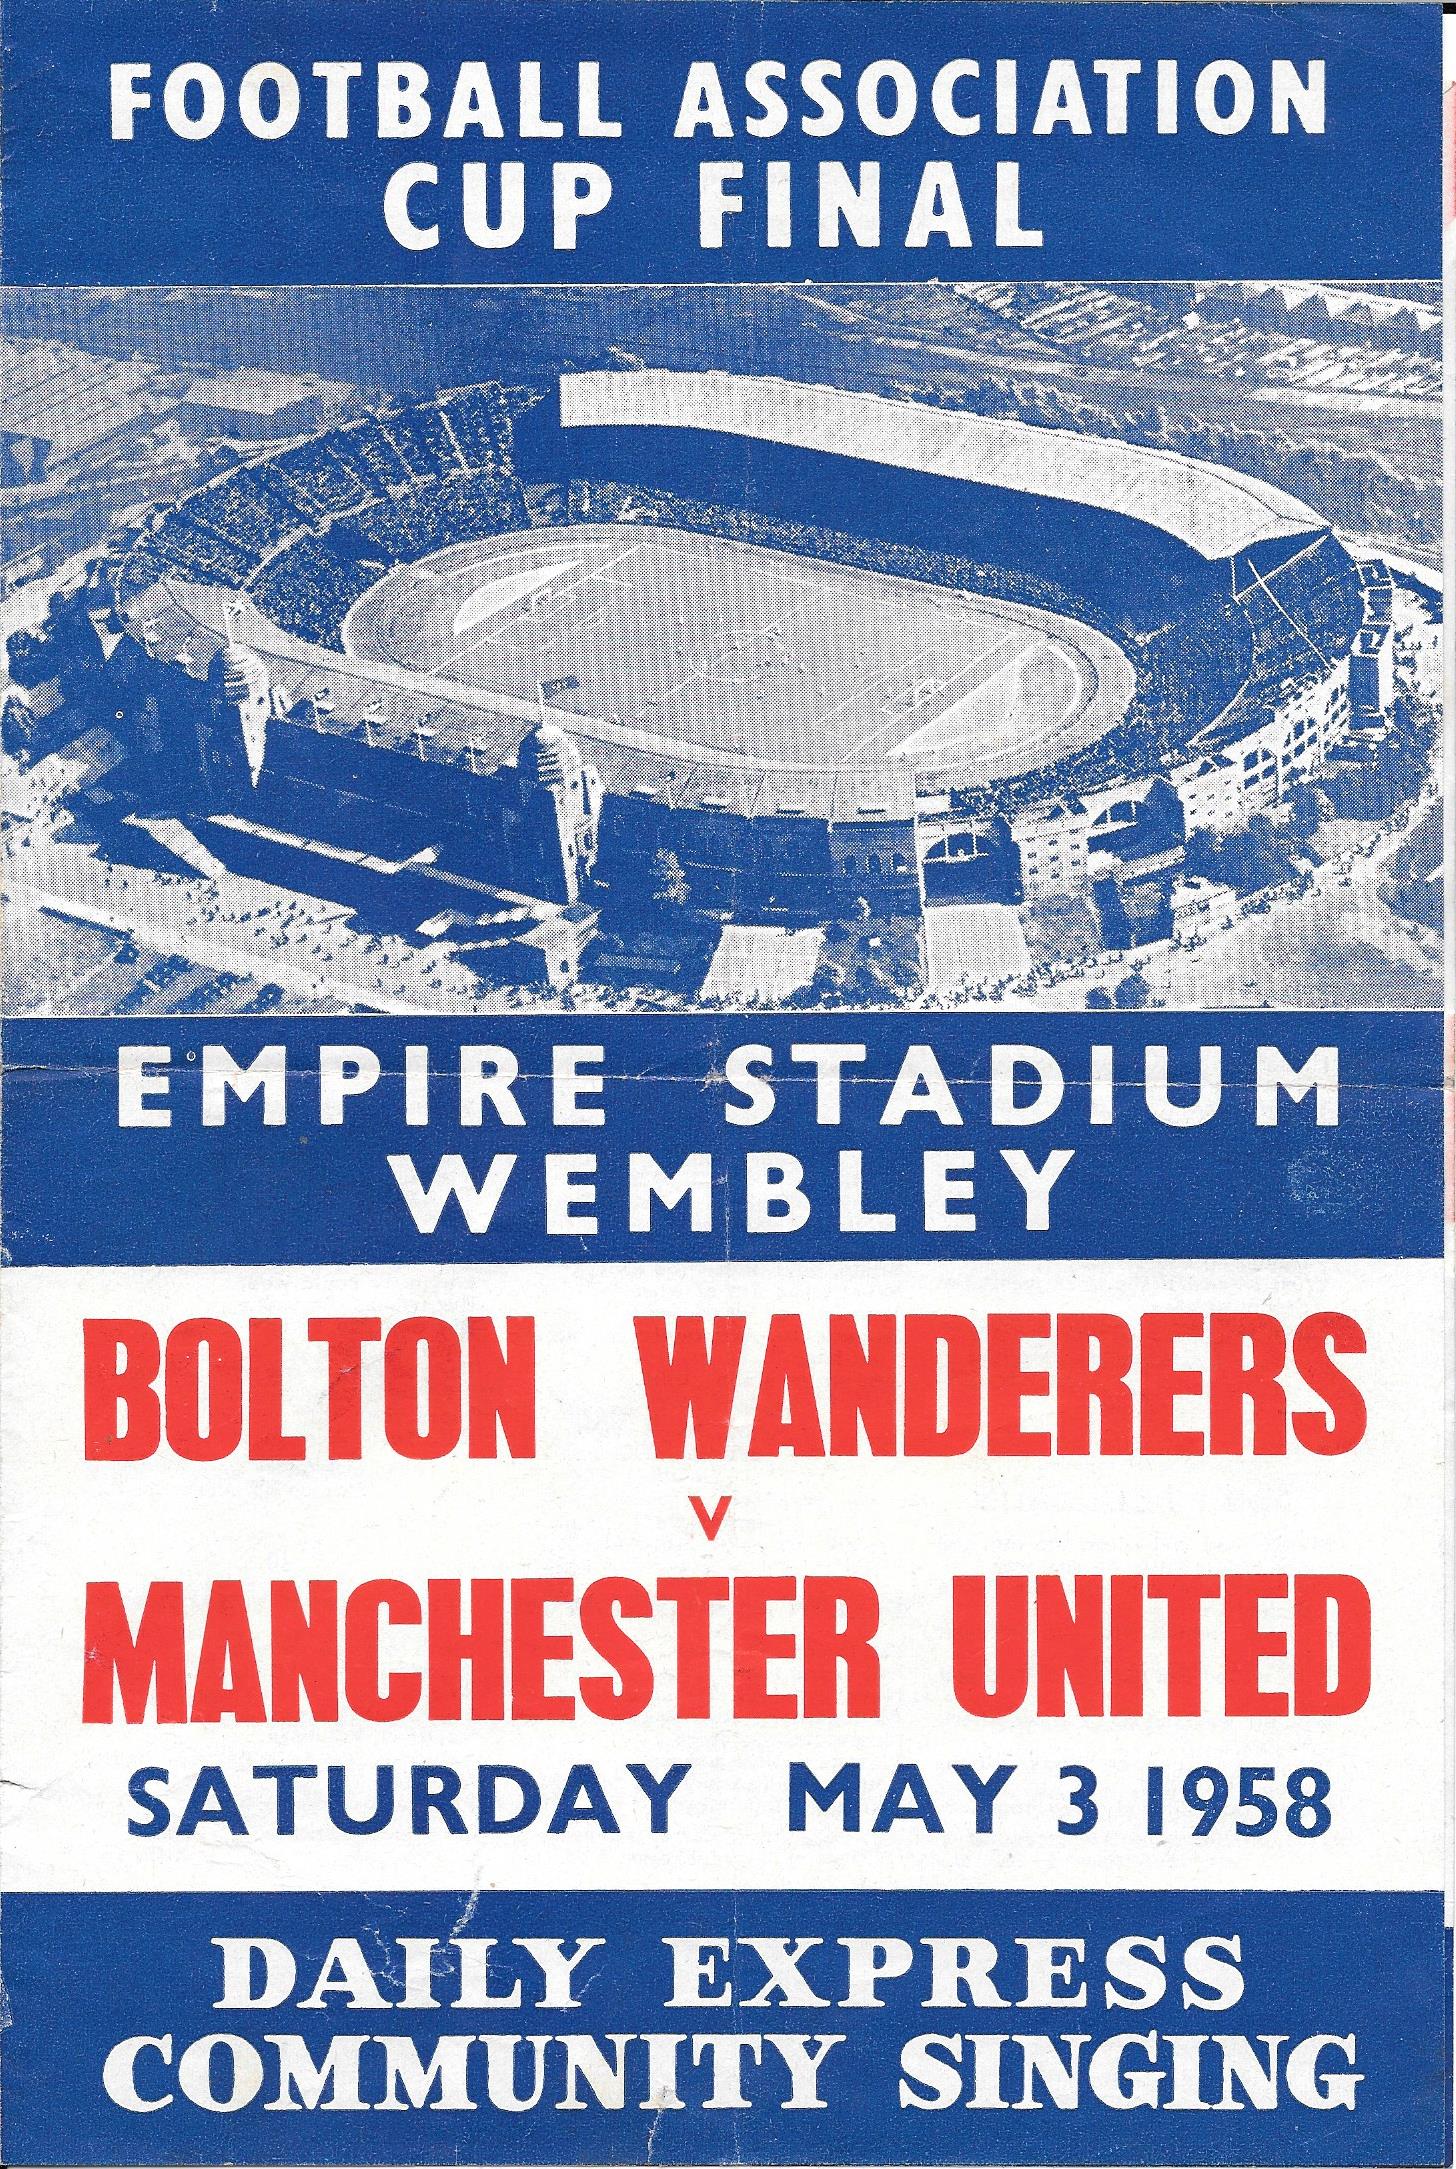 1958 FA CUP FINAL BOLTON V MANCHESTER UNITED - PROGRAMME & SONG SHEET - Image 2 of 2